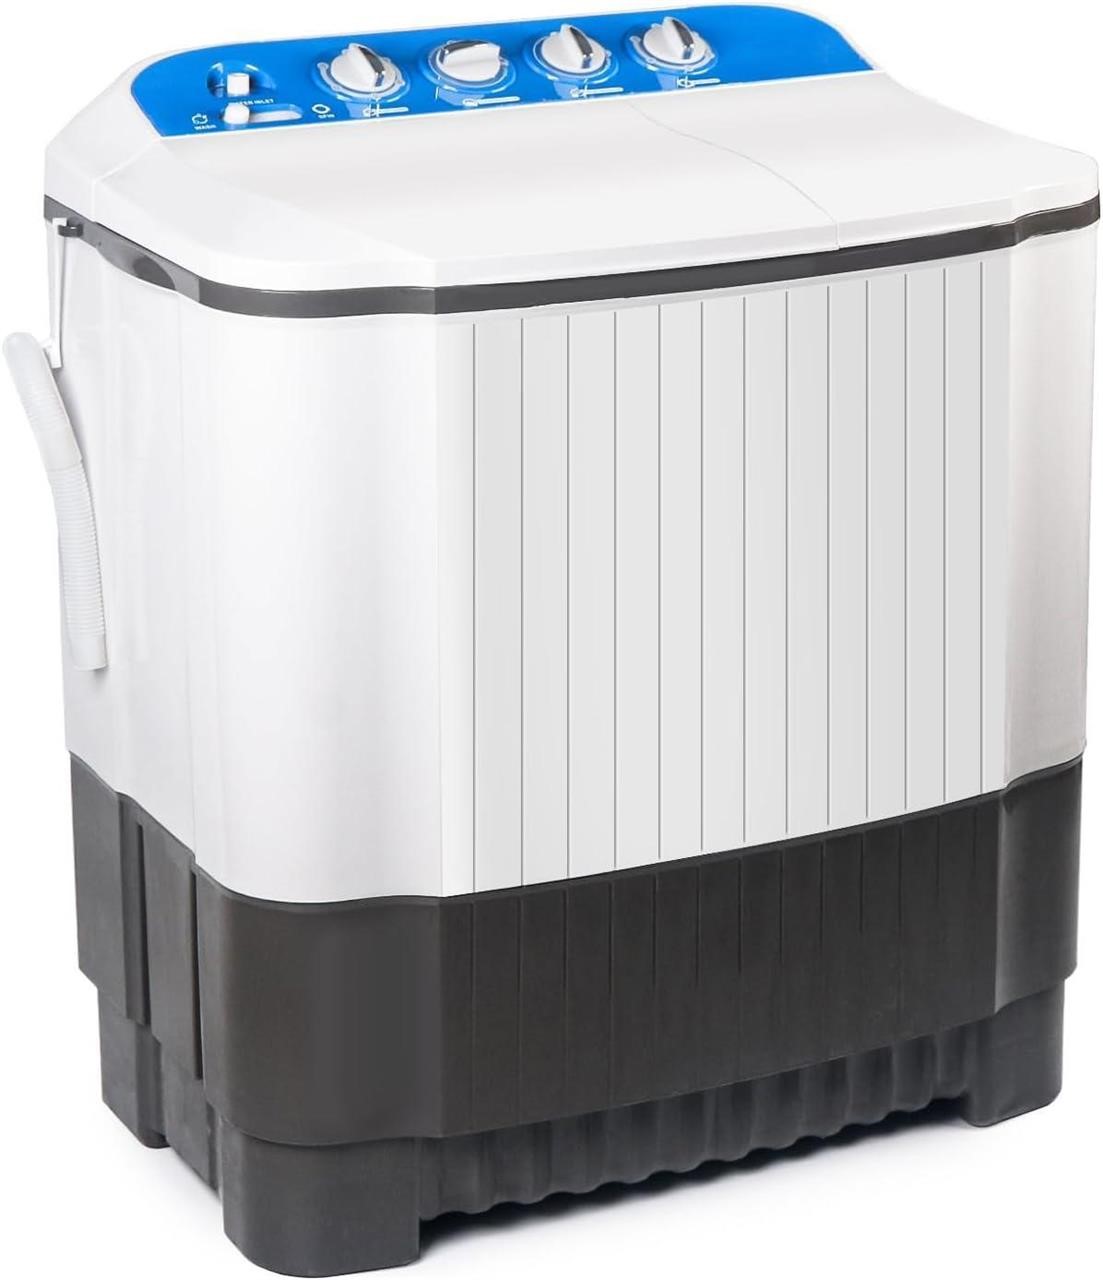 SEALED-24Lbs 2-in-1 Twin Tub Compact Washer